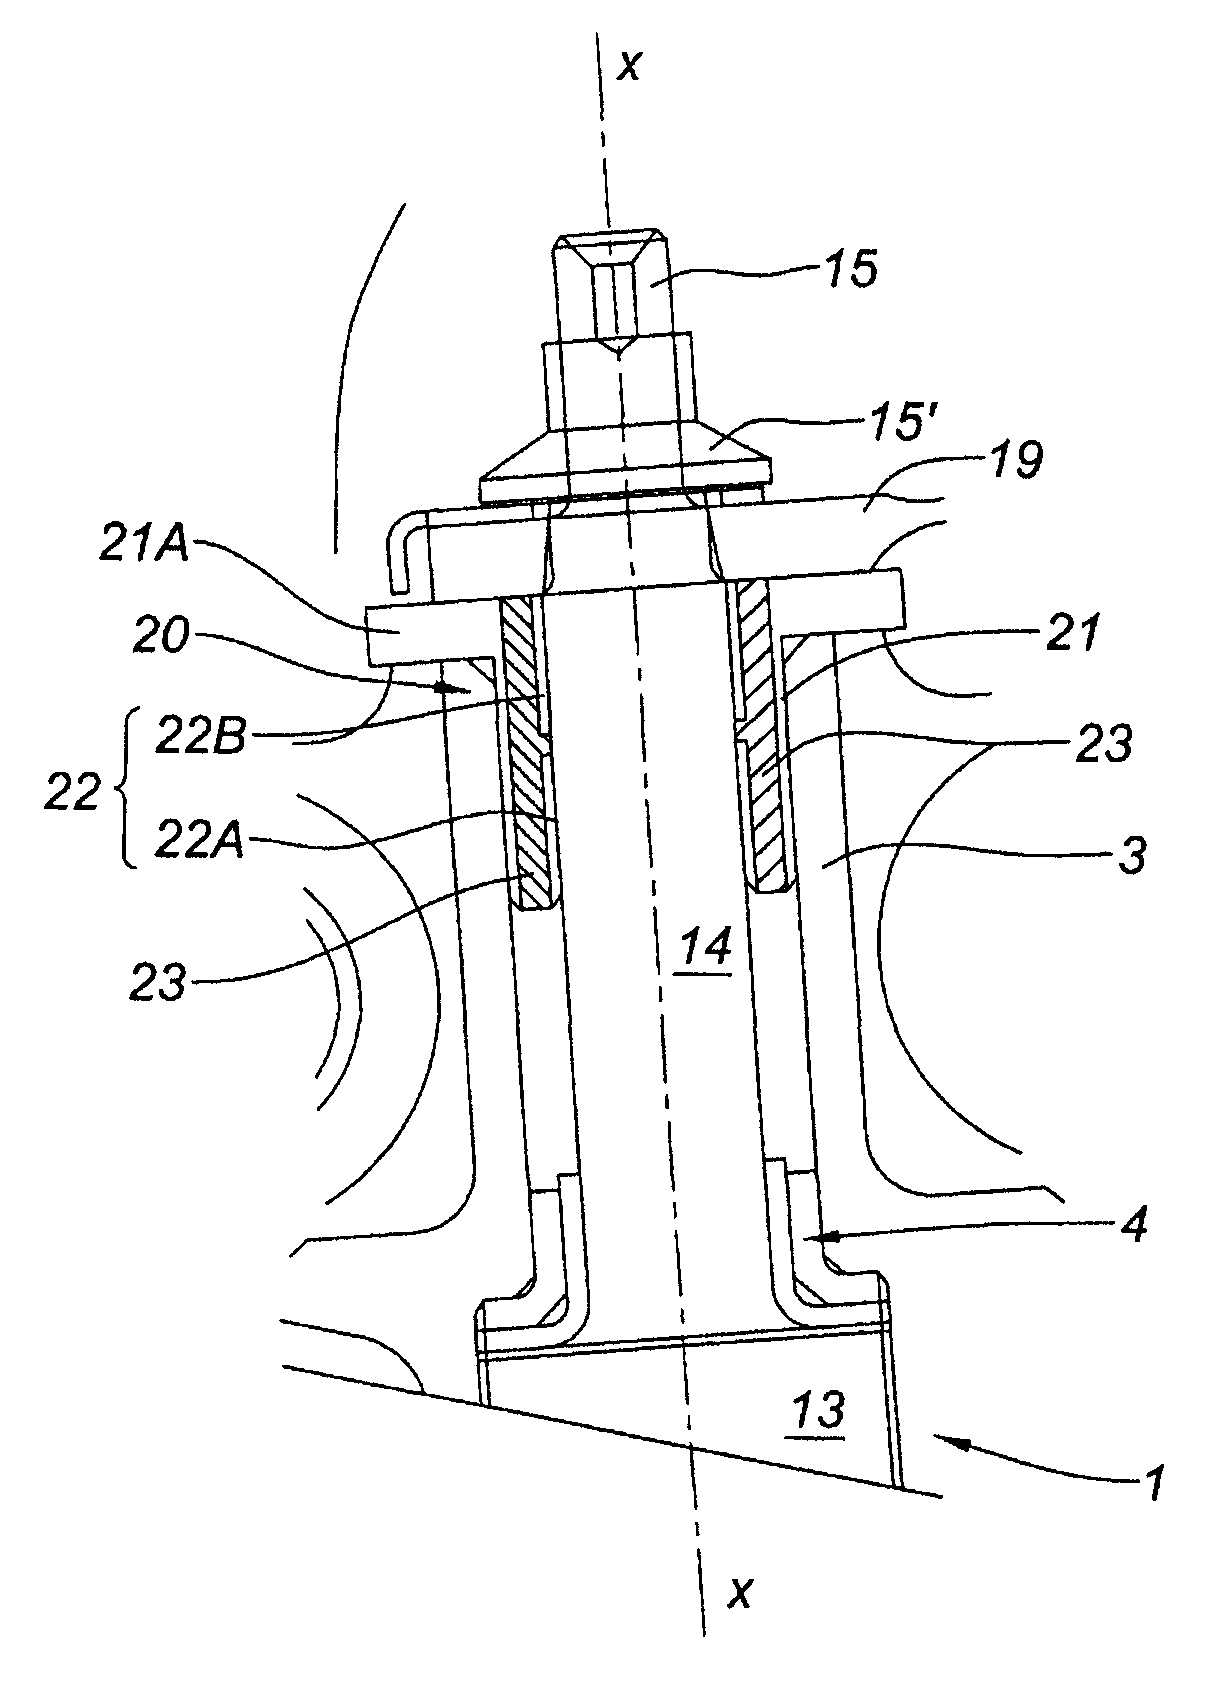 Bearing for variable pitch stator vane